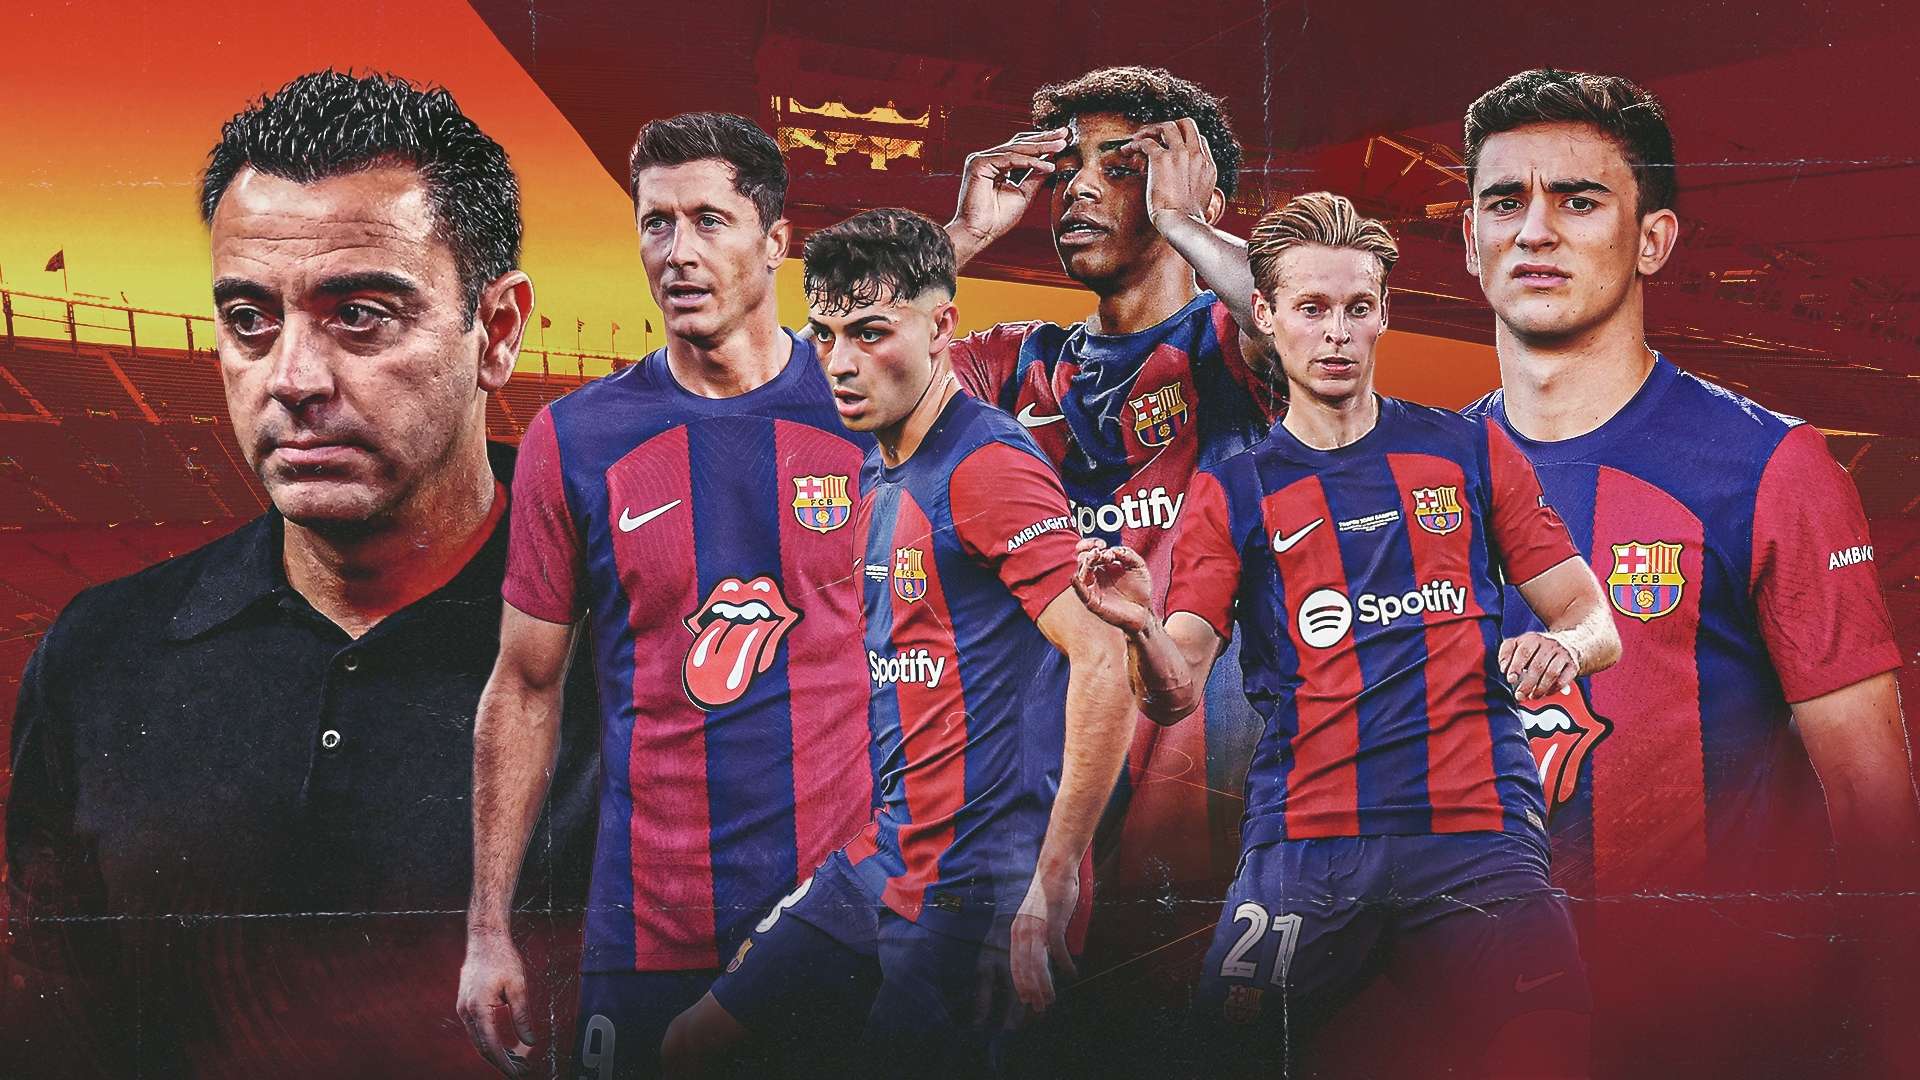 Barca have not bad result in this season